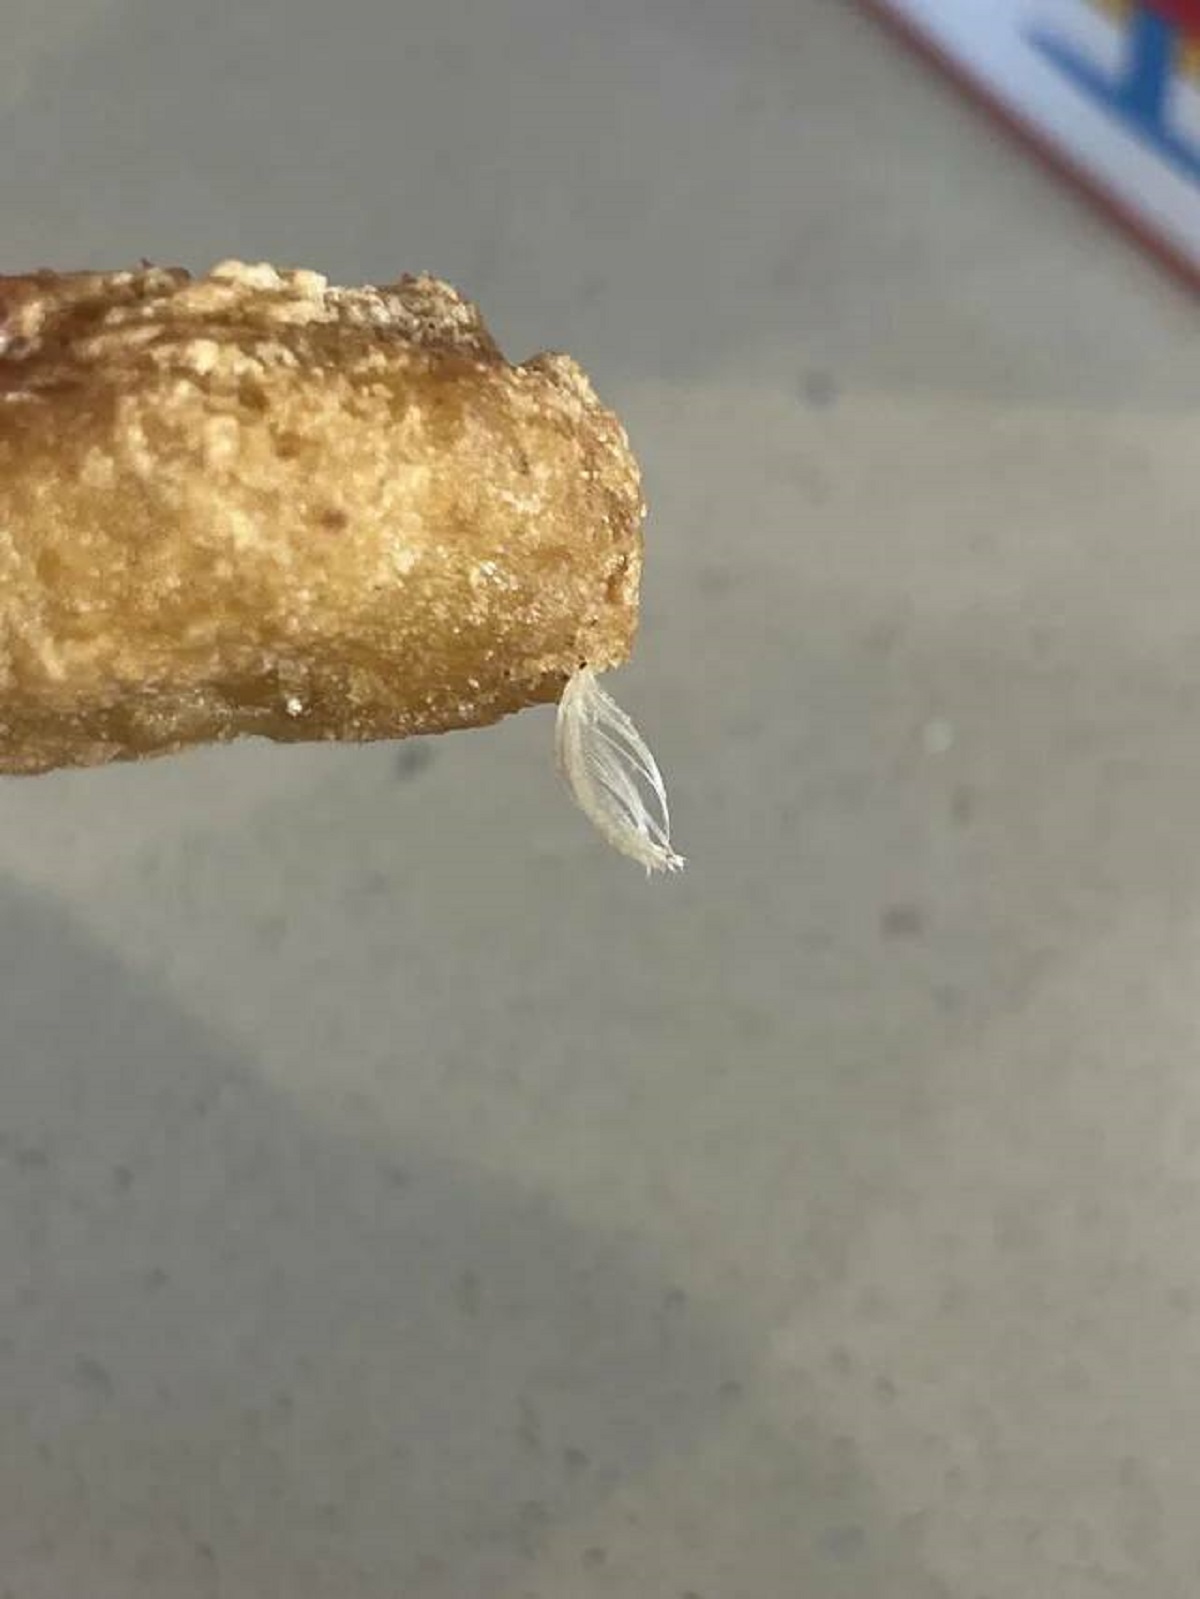 "I found a feather in a McDonald’s chicken nugget"